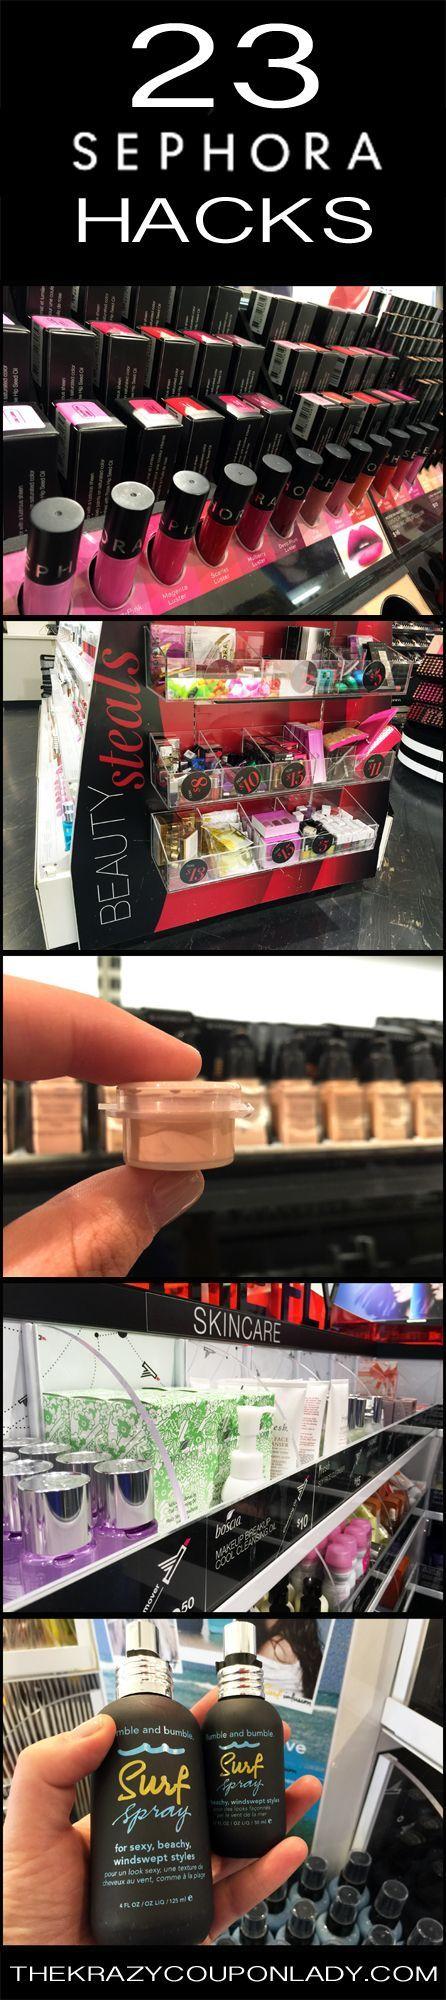 Wedding - 23 Insider Hacks From A Sephora Employee - The Krazy Coupon Lady